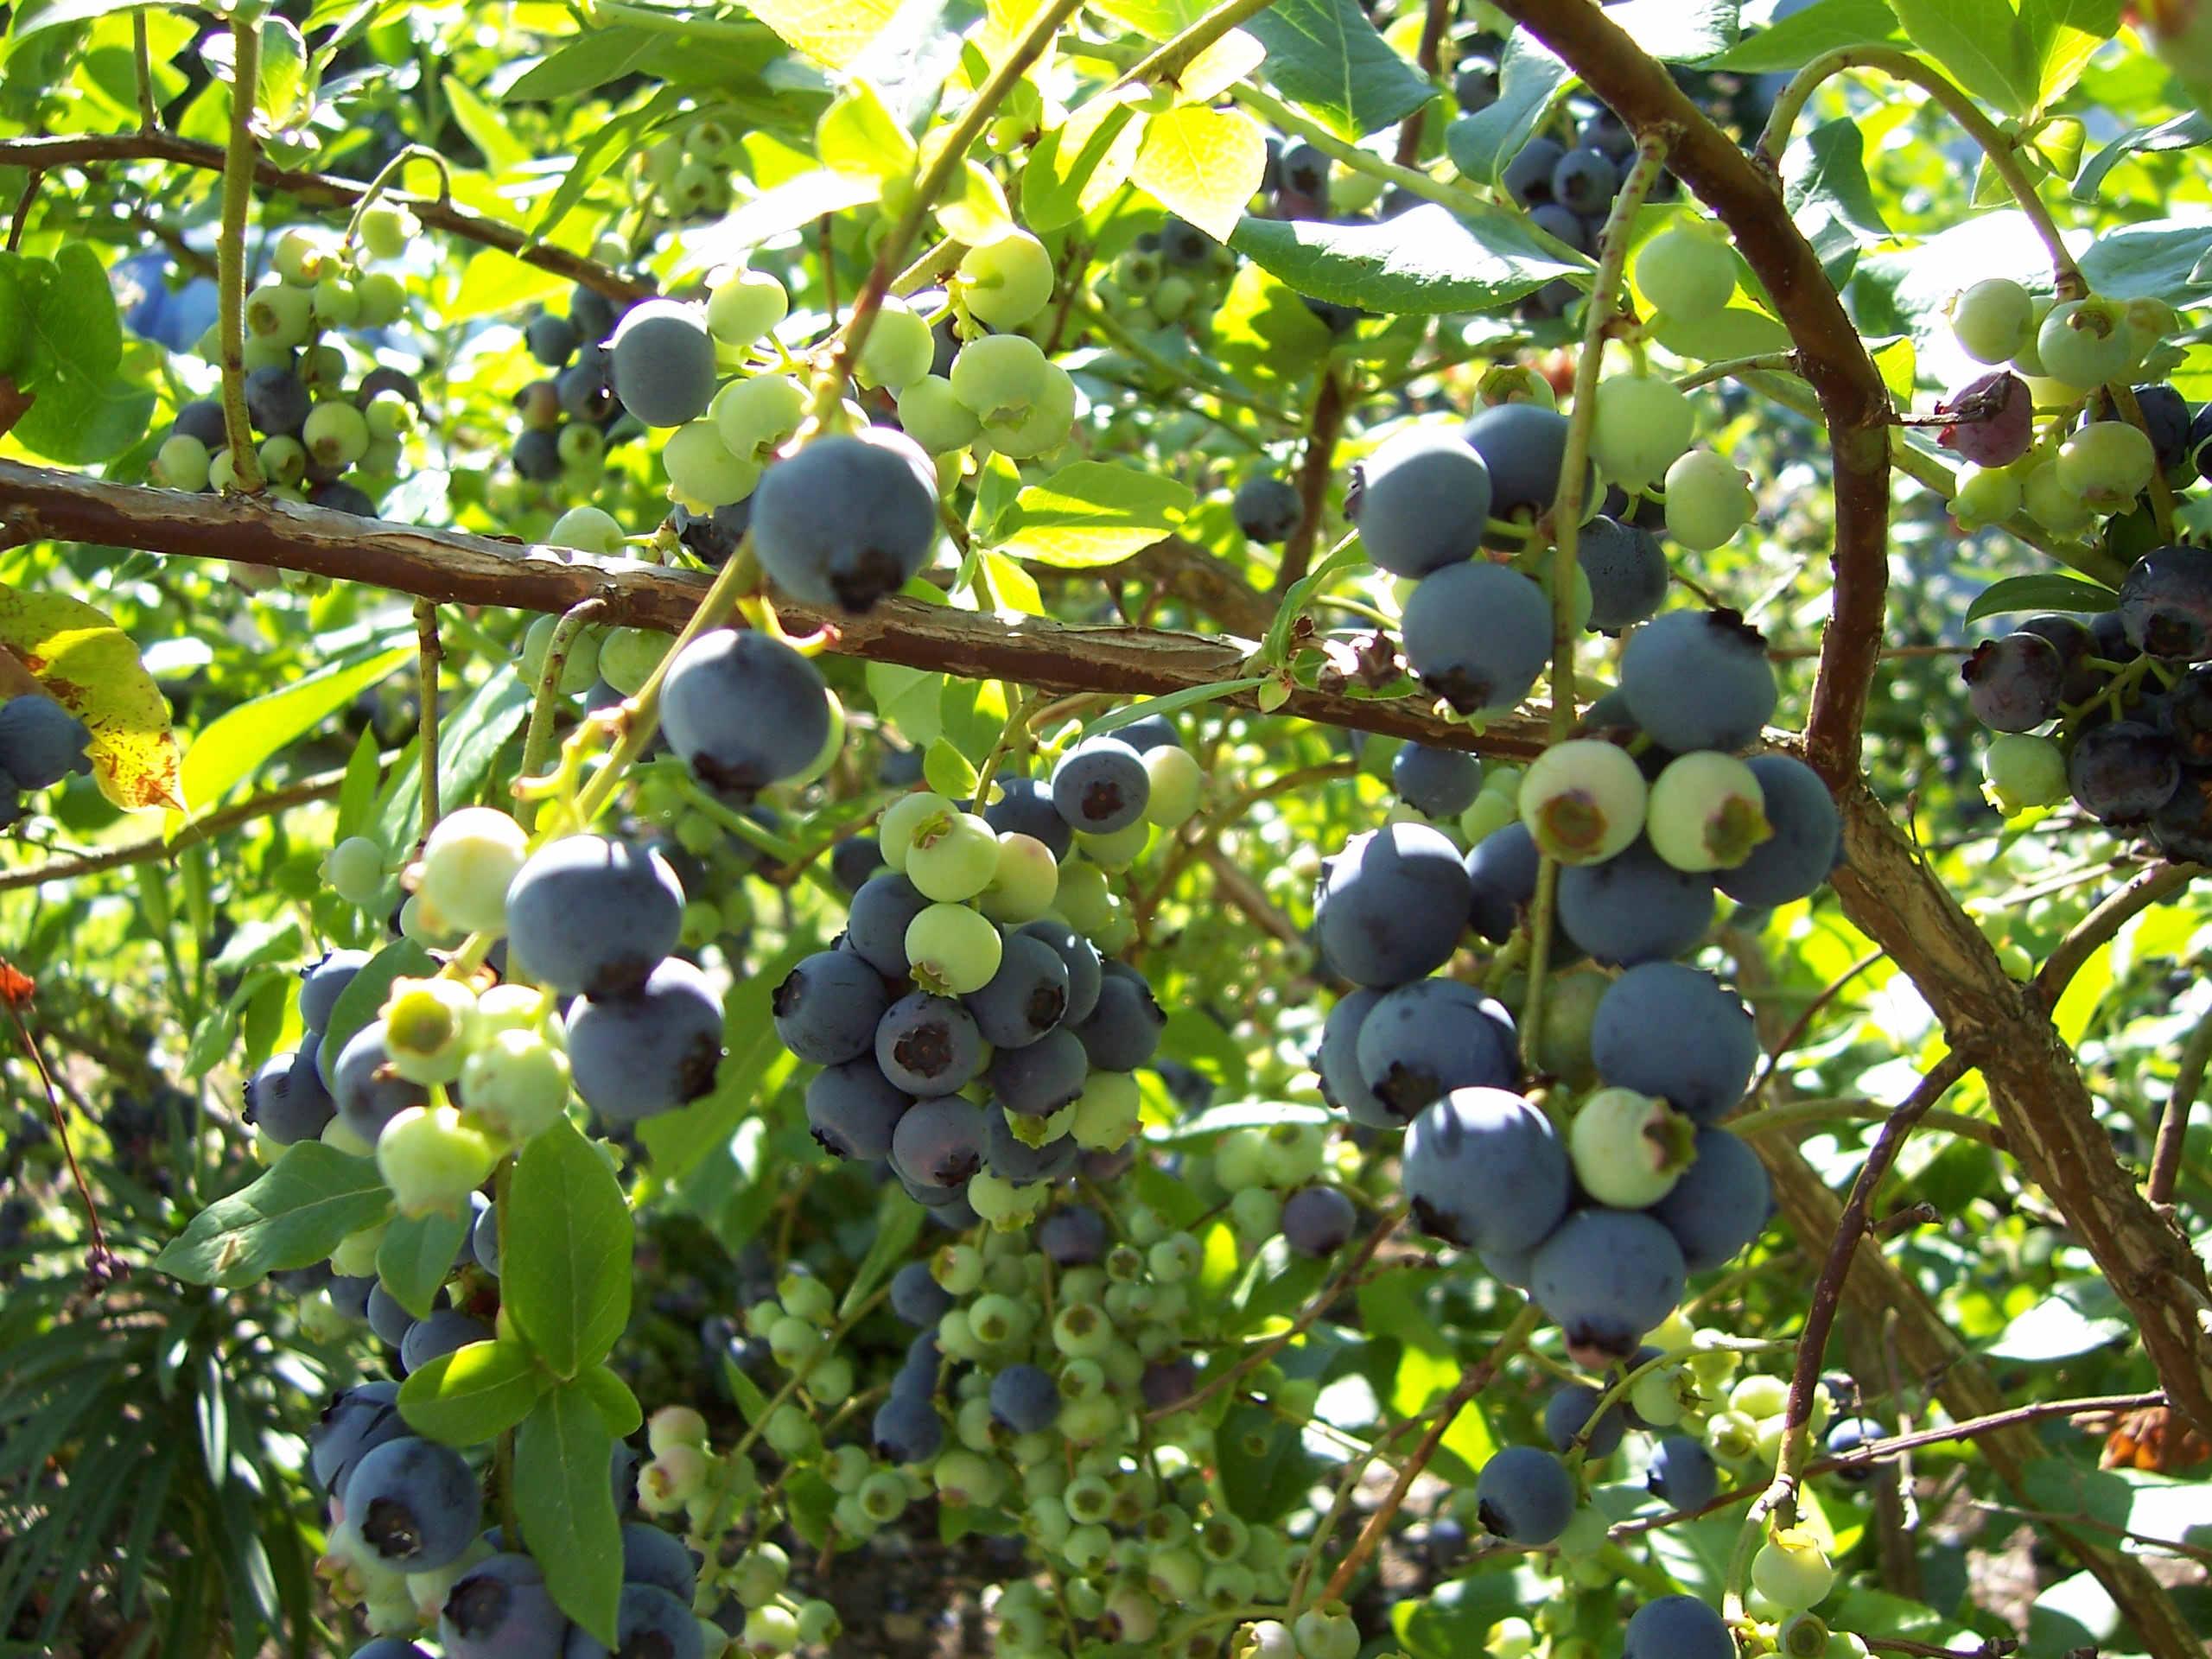 Blueberries (user submitted)